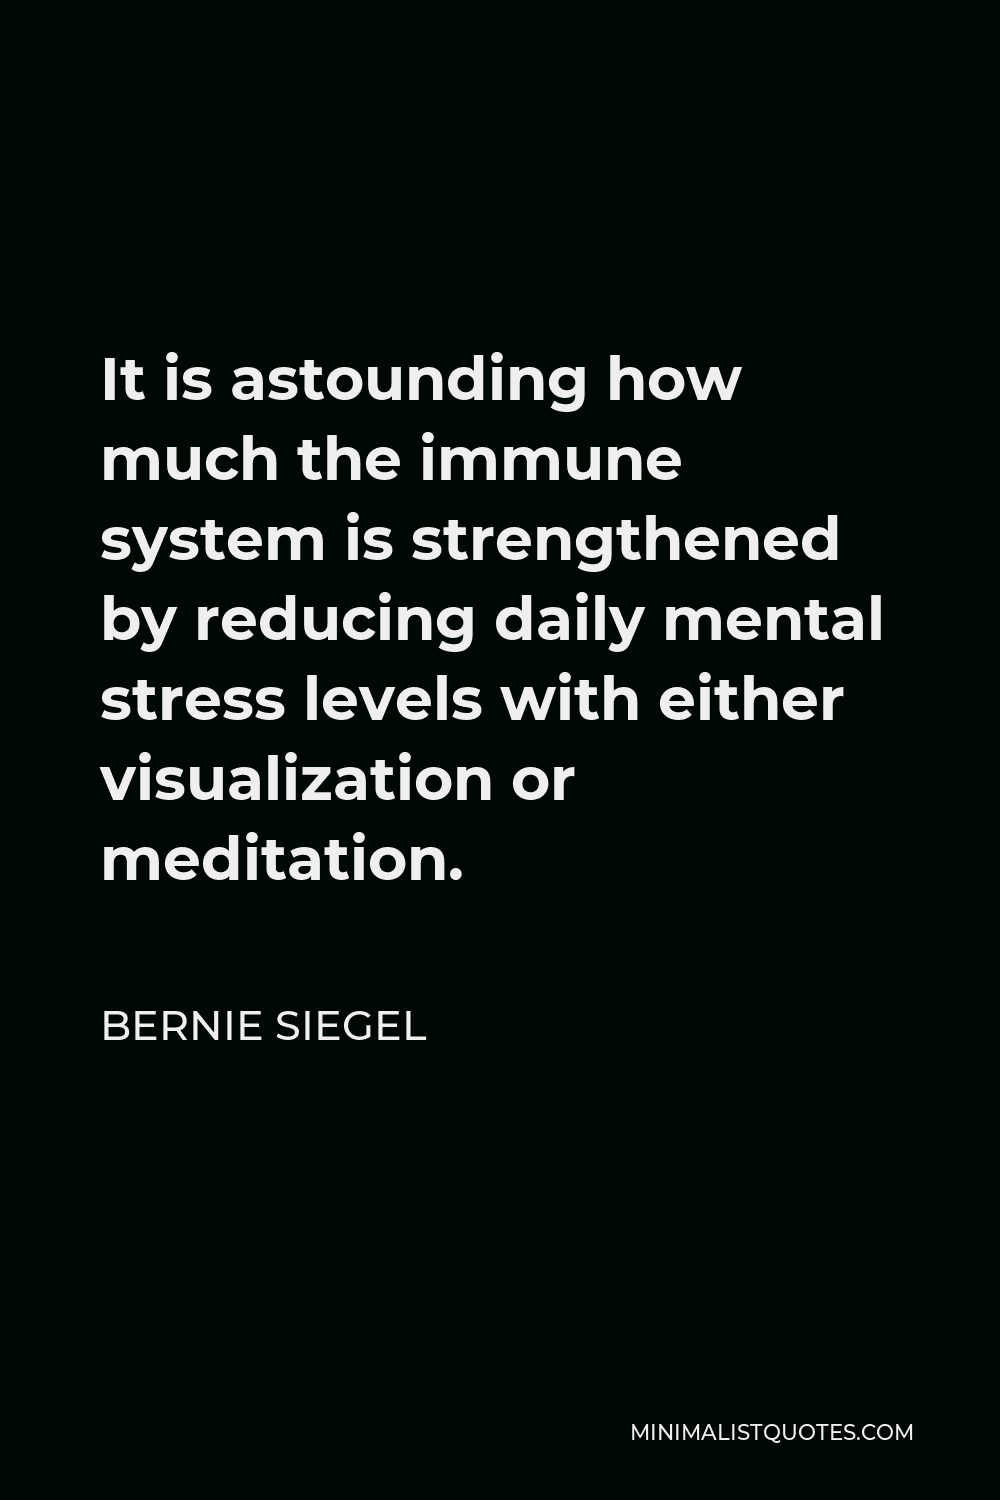 Bernie Siegel Quote - It is astounding how much the immune system is strengthened by reducing daily mental stress levels with either visualization or meditation.